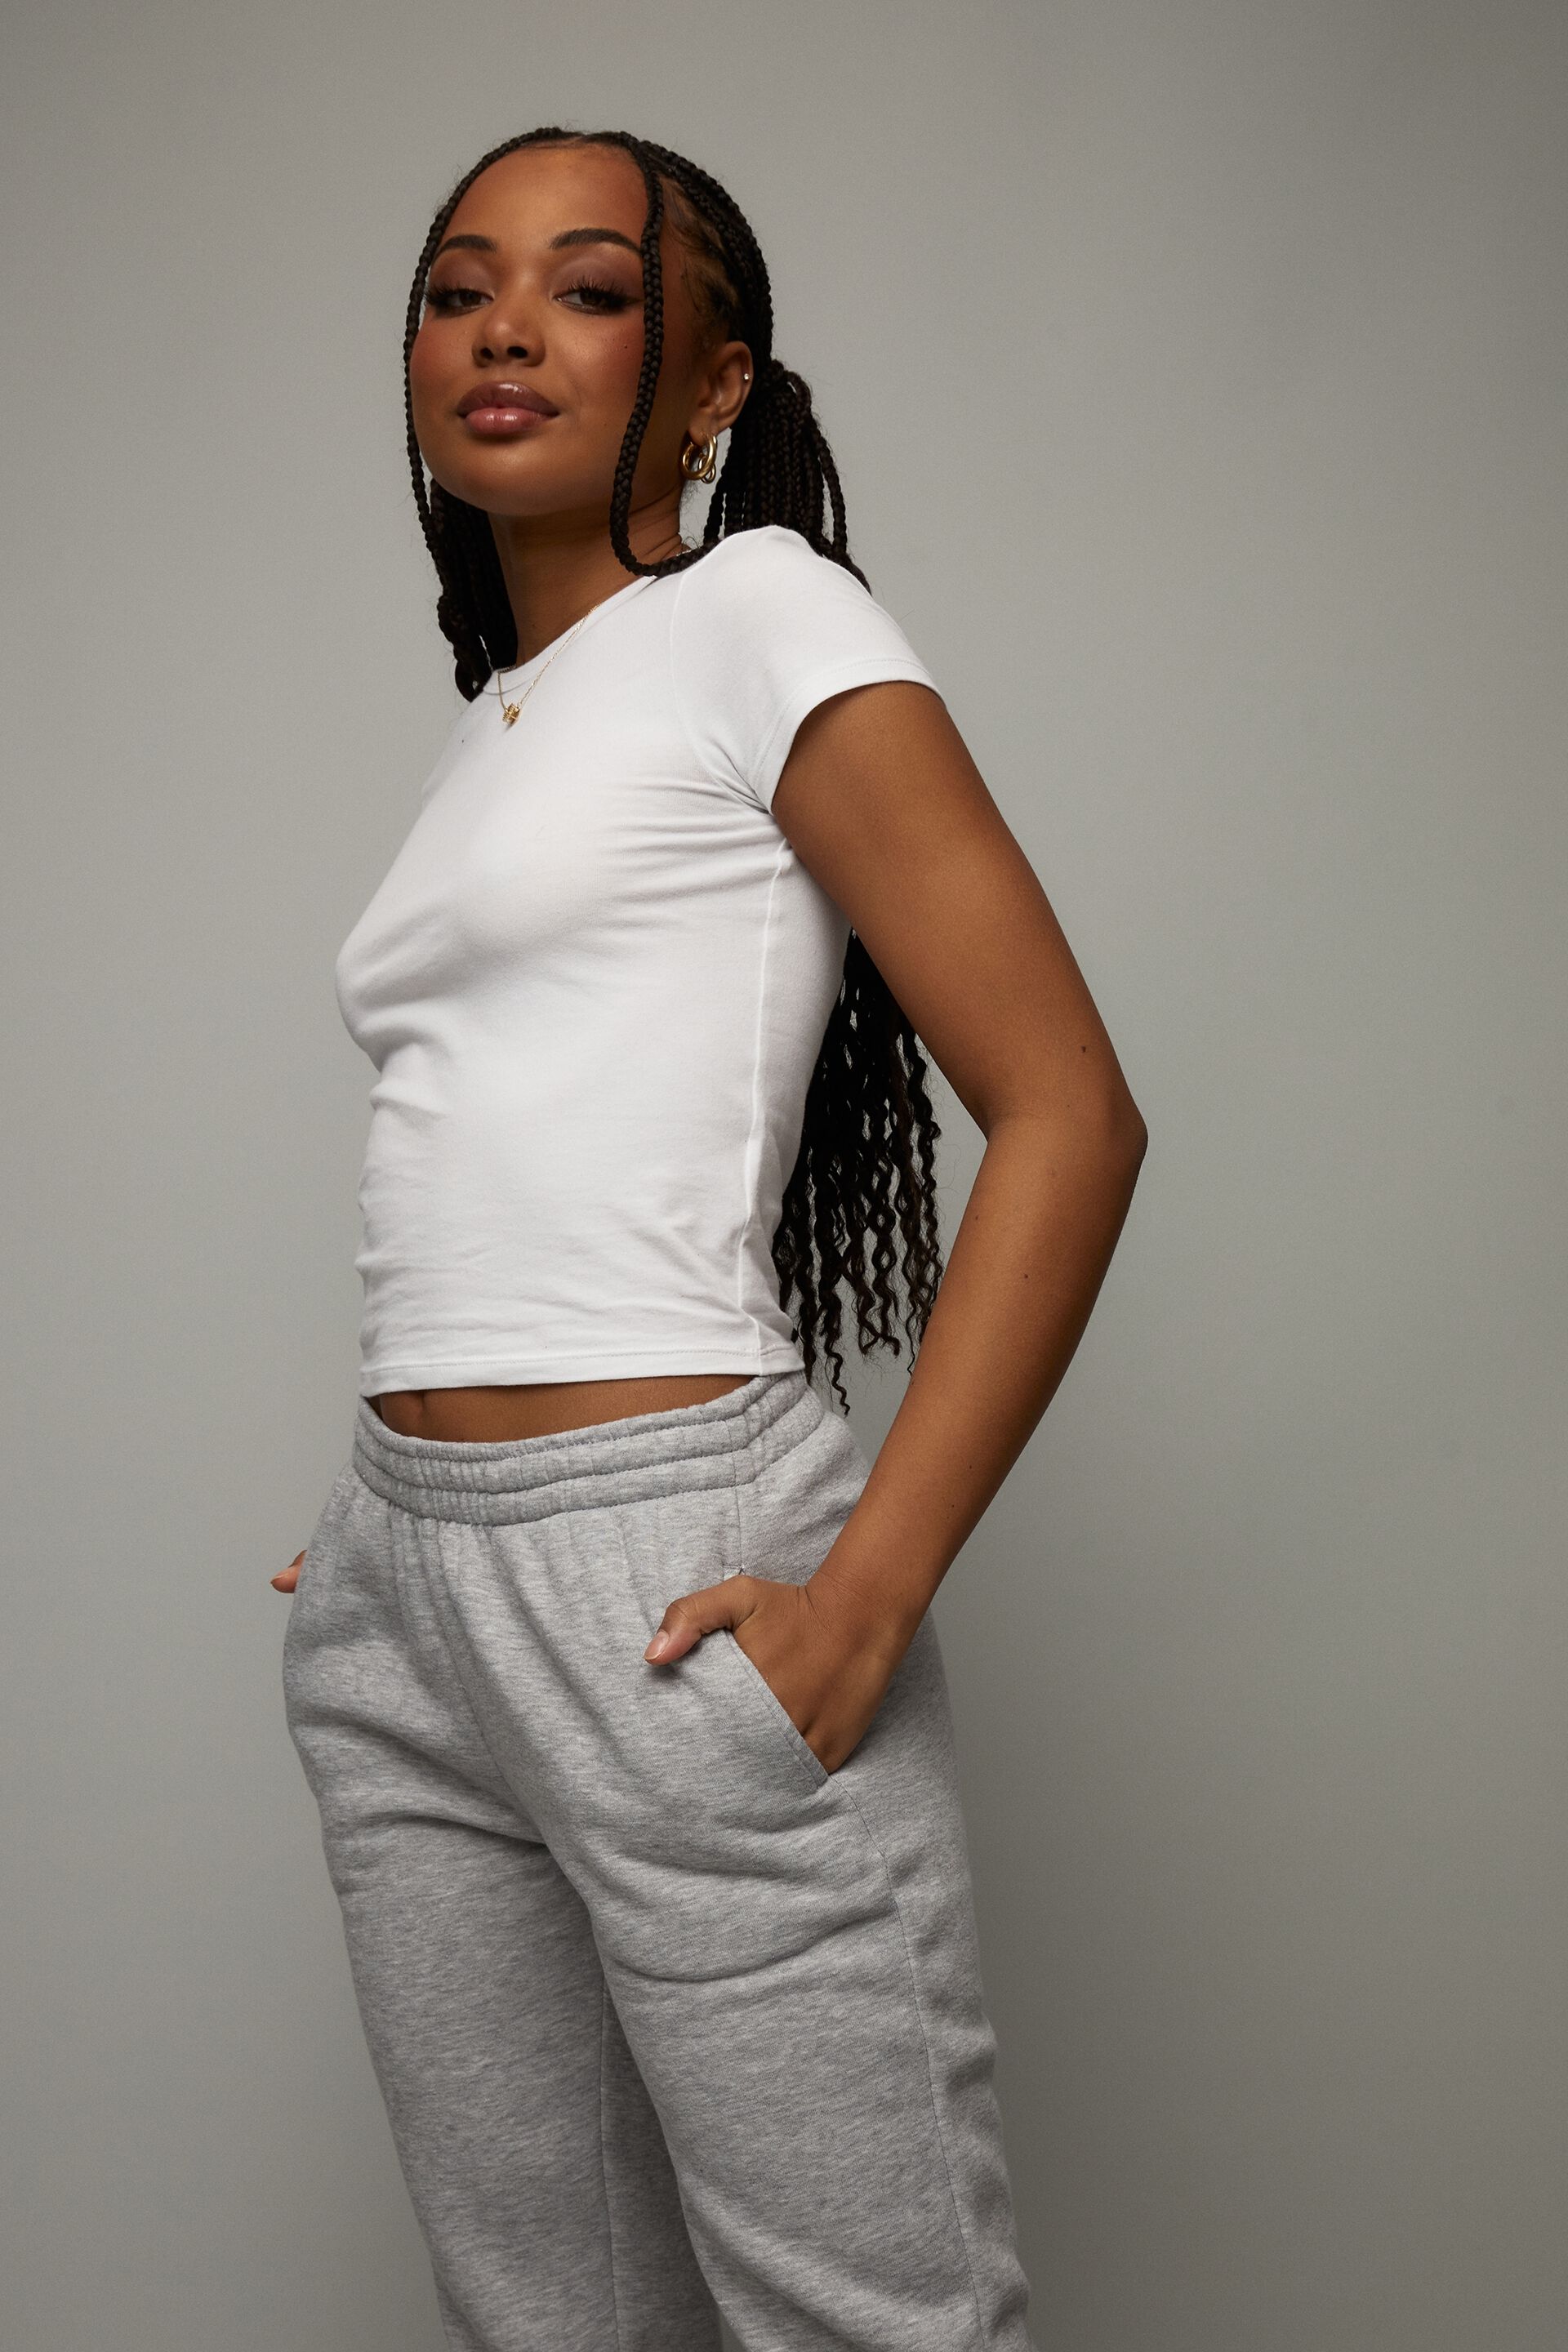 Classic Trackpant | Women's Fashion & Accessories | Factorie